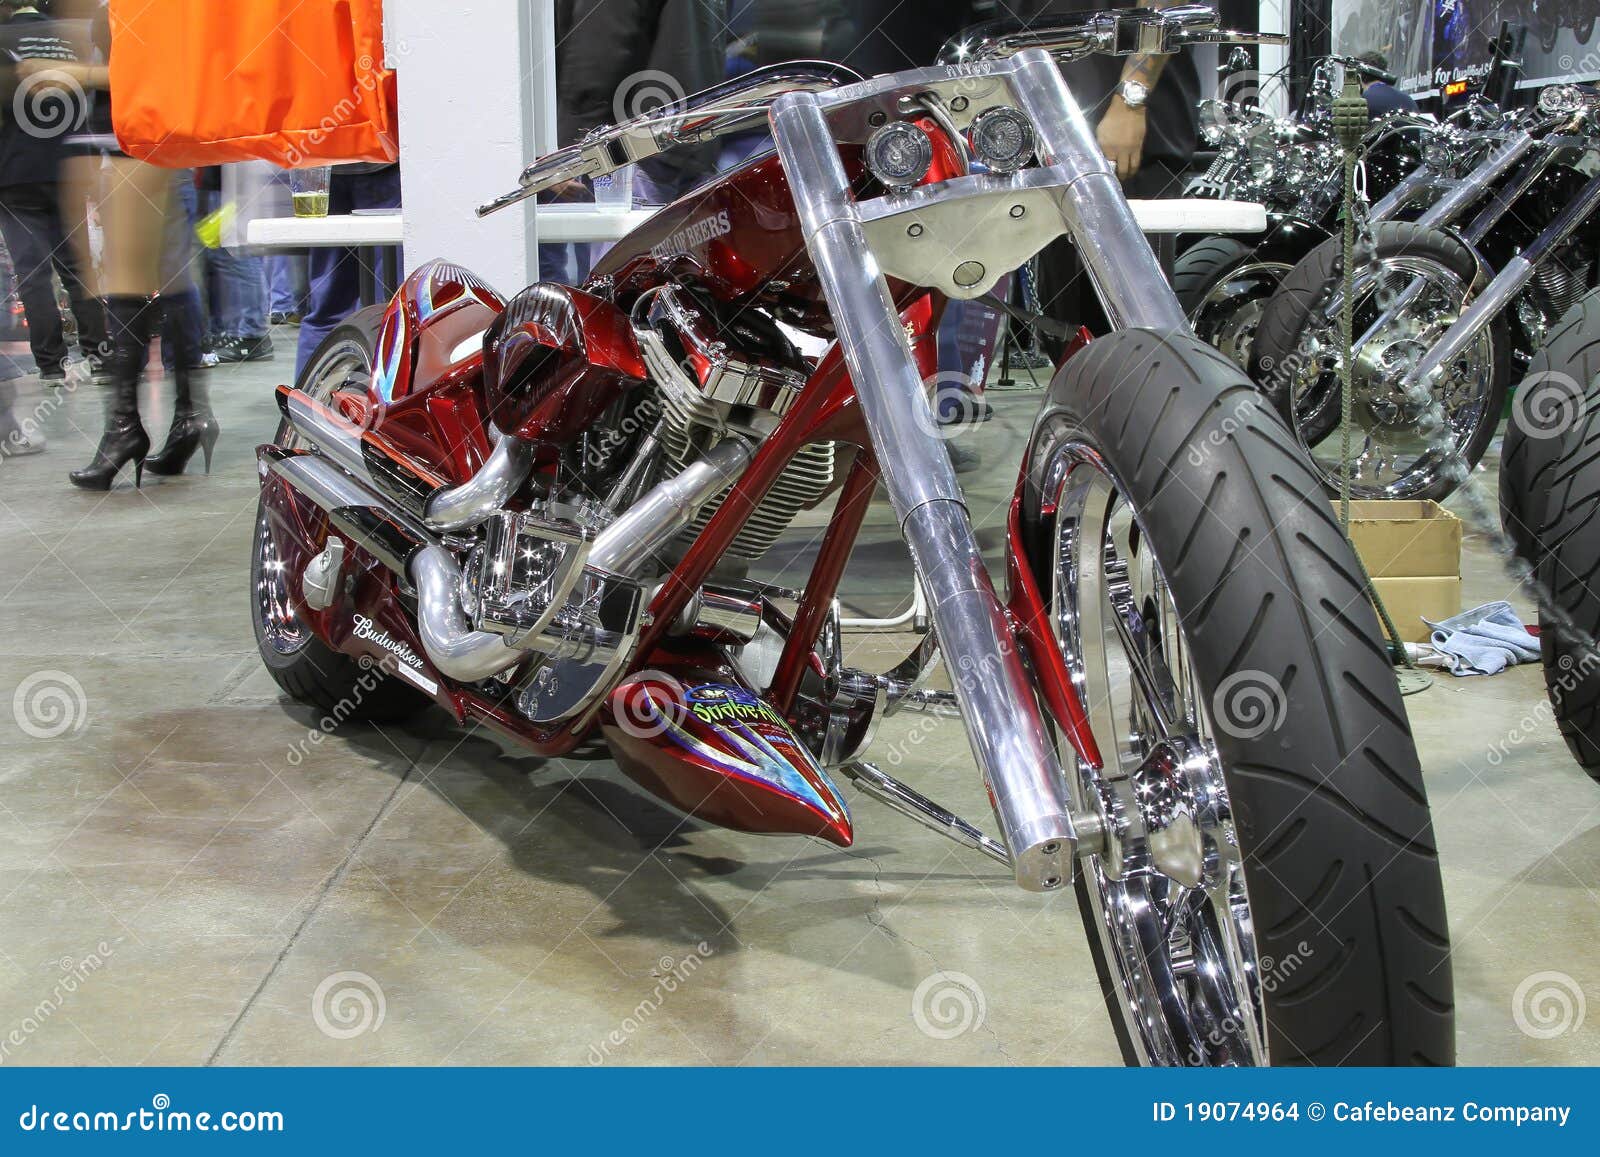 Chicago Motorcycle Show editorial stock image. Image of convention